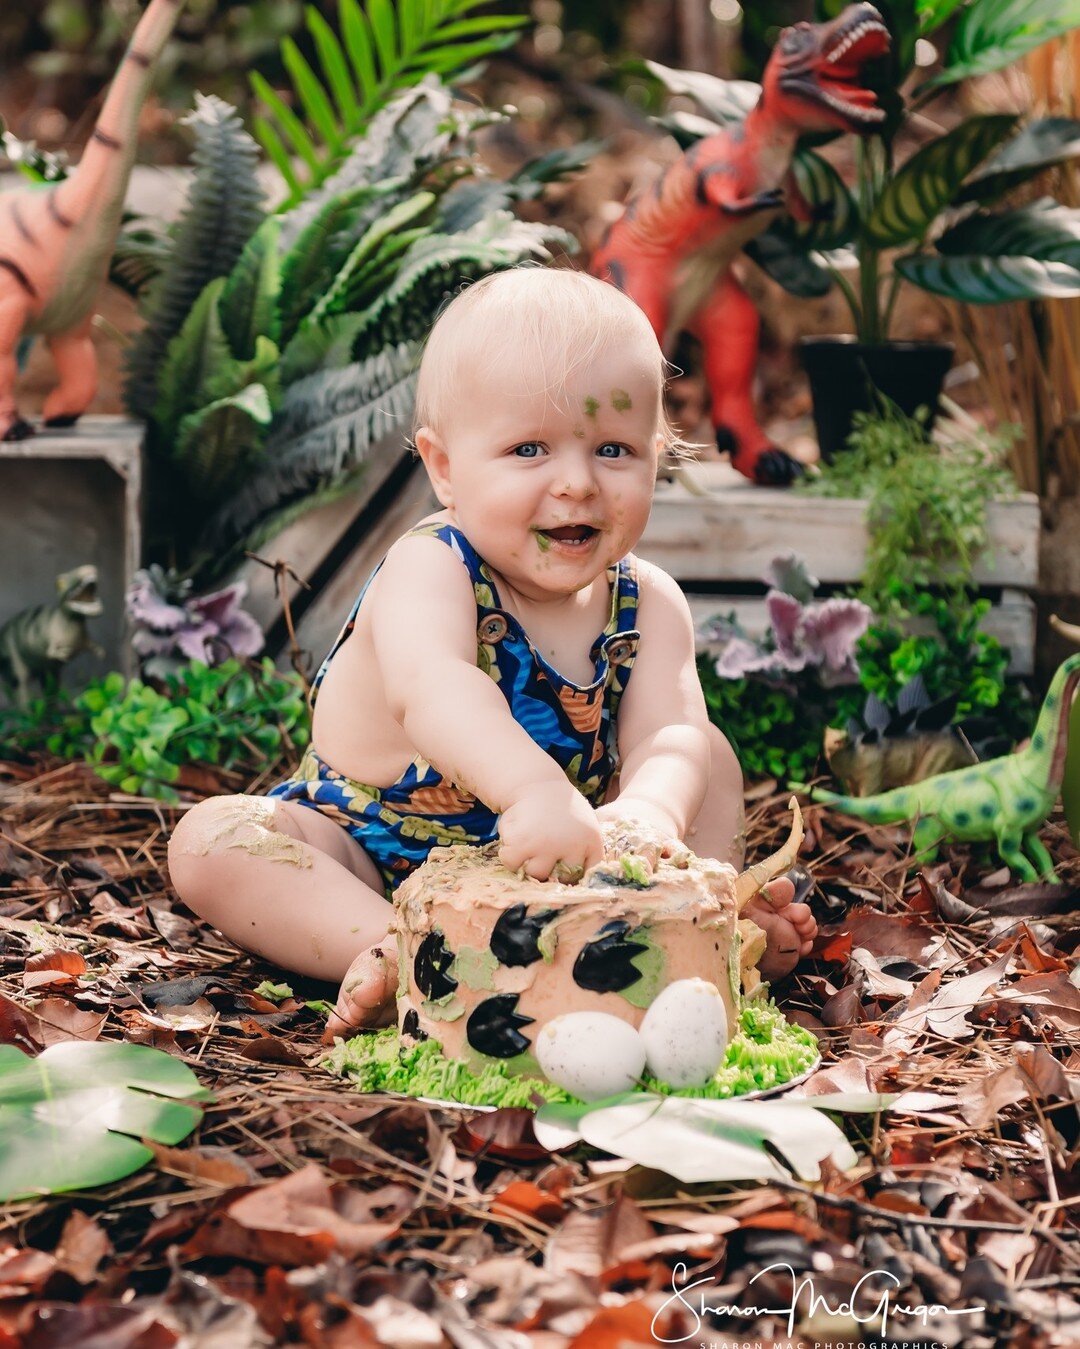 Yet another gorgeous bubba celebrating their first birthday today!  This time its the super cute Arthur with his outdoor dinosaur cake smash.Little Arthur got right into the cake smash component, absolutely smooshing his cake by A Sweet Endeavour. (h